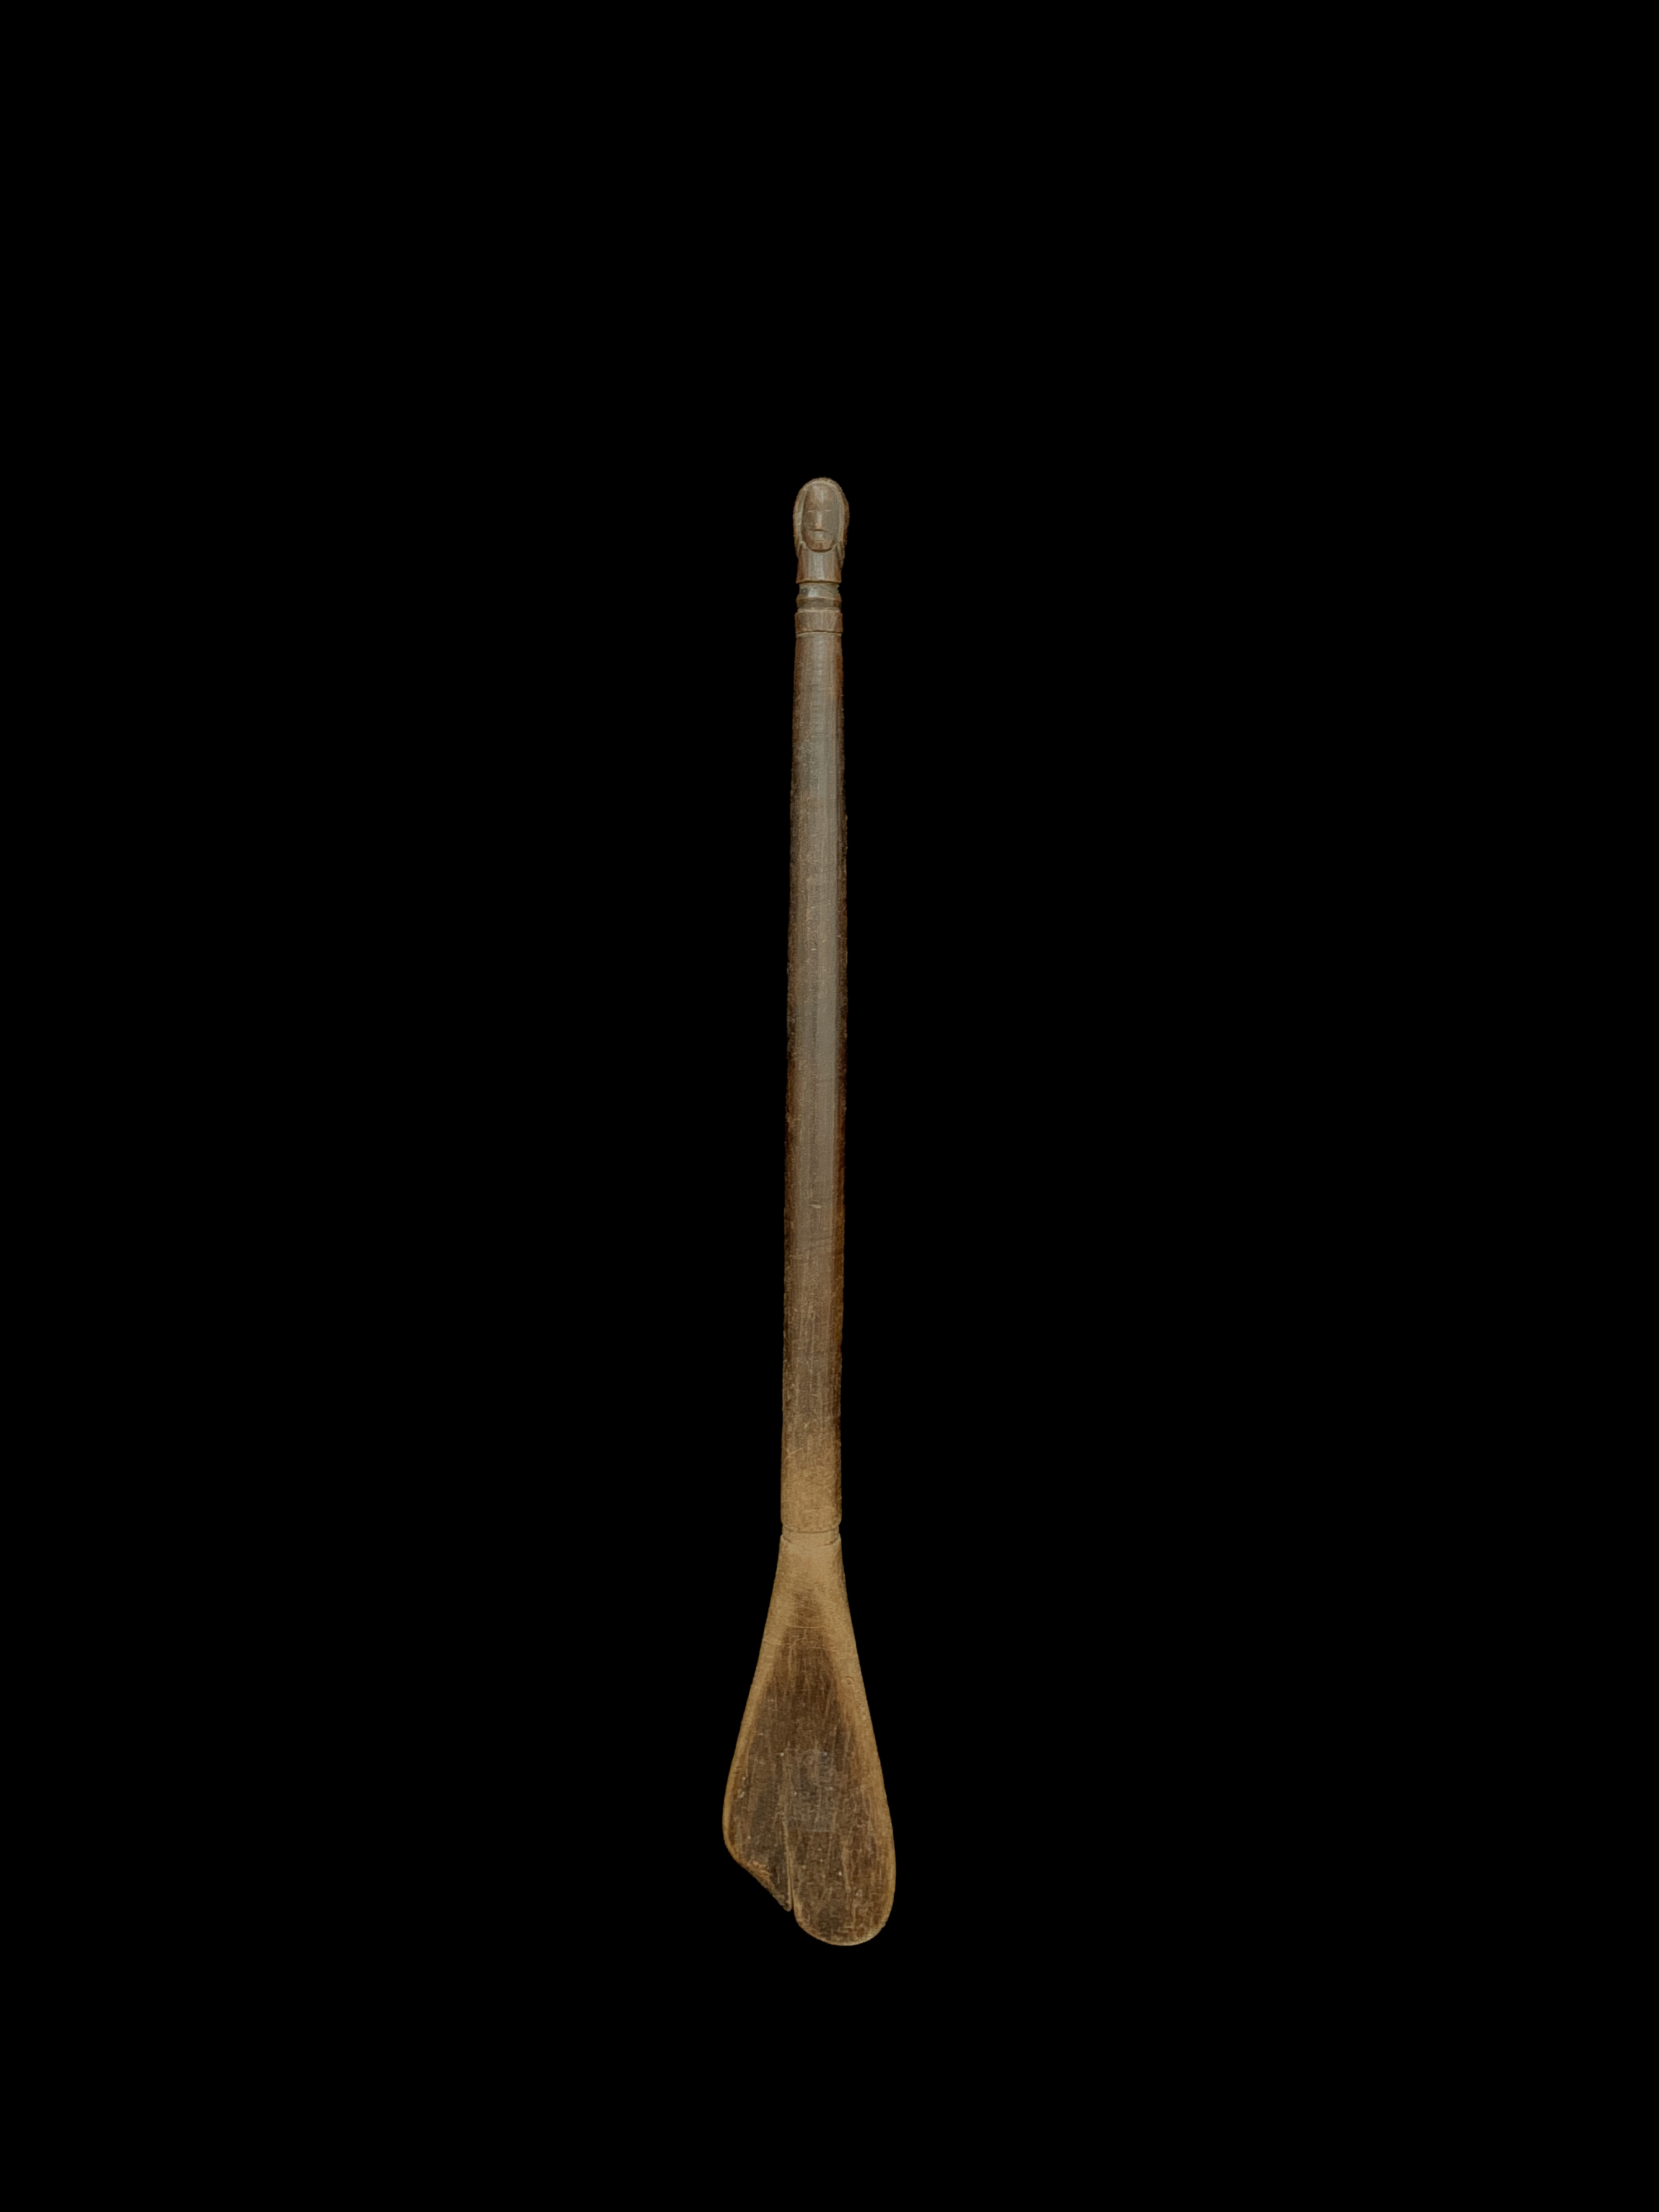 Spoon/Ladle with Face - Lozi People, Zambia